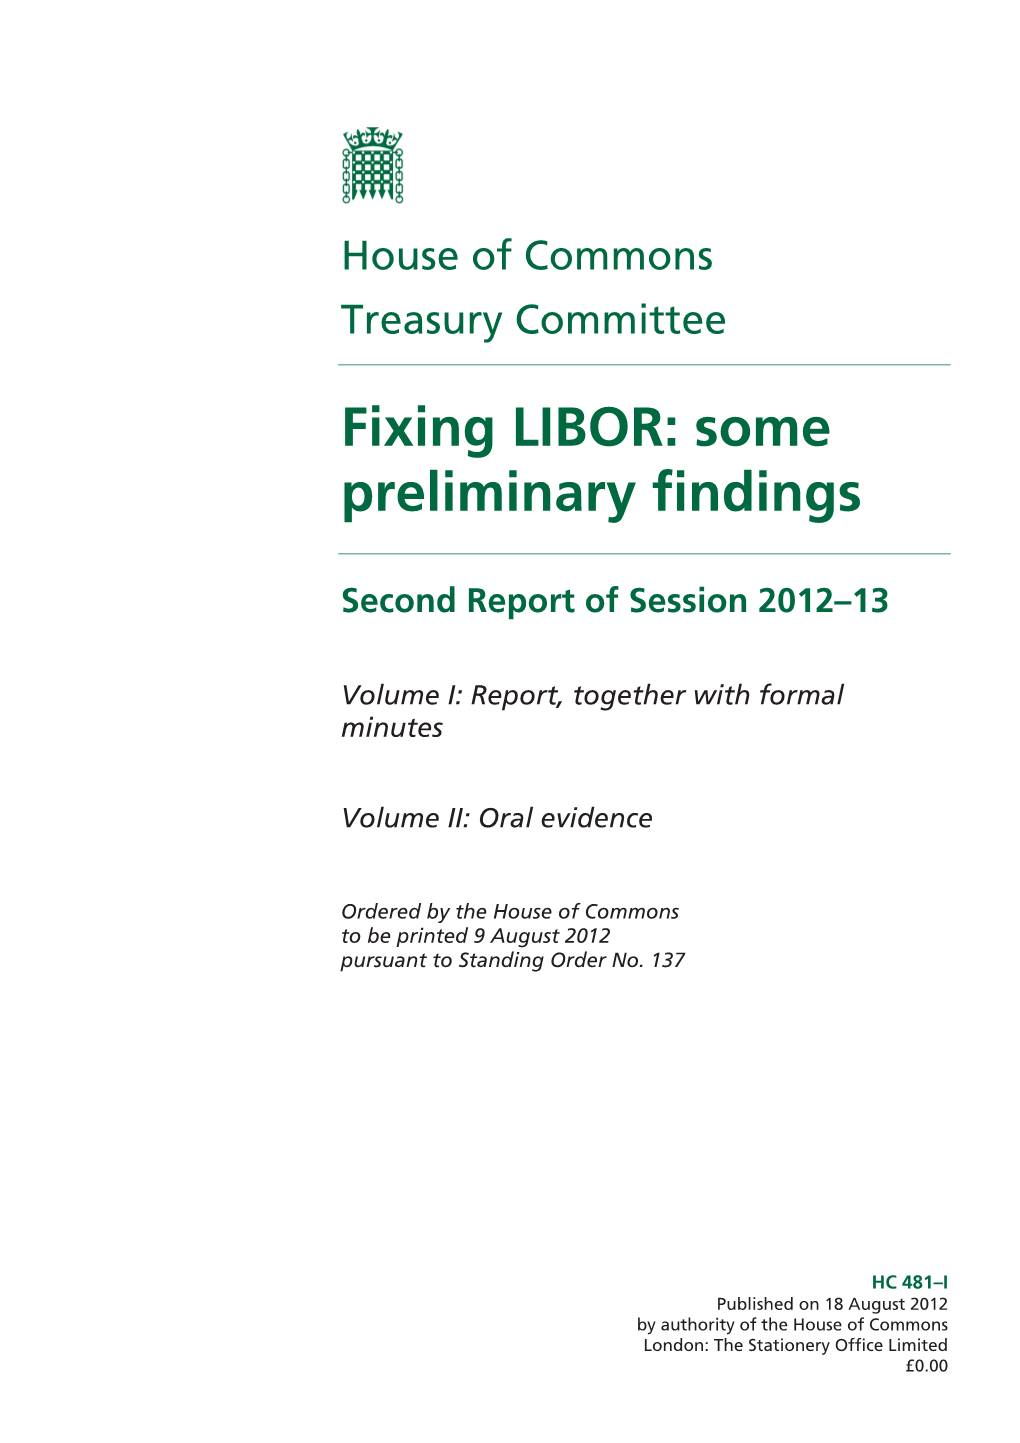 Fixing LIBOR: Some Preliminary Findings